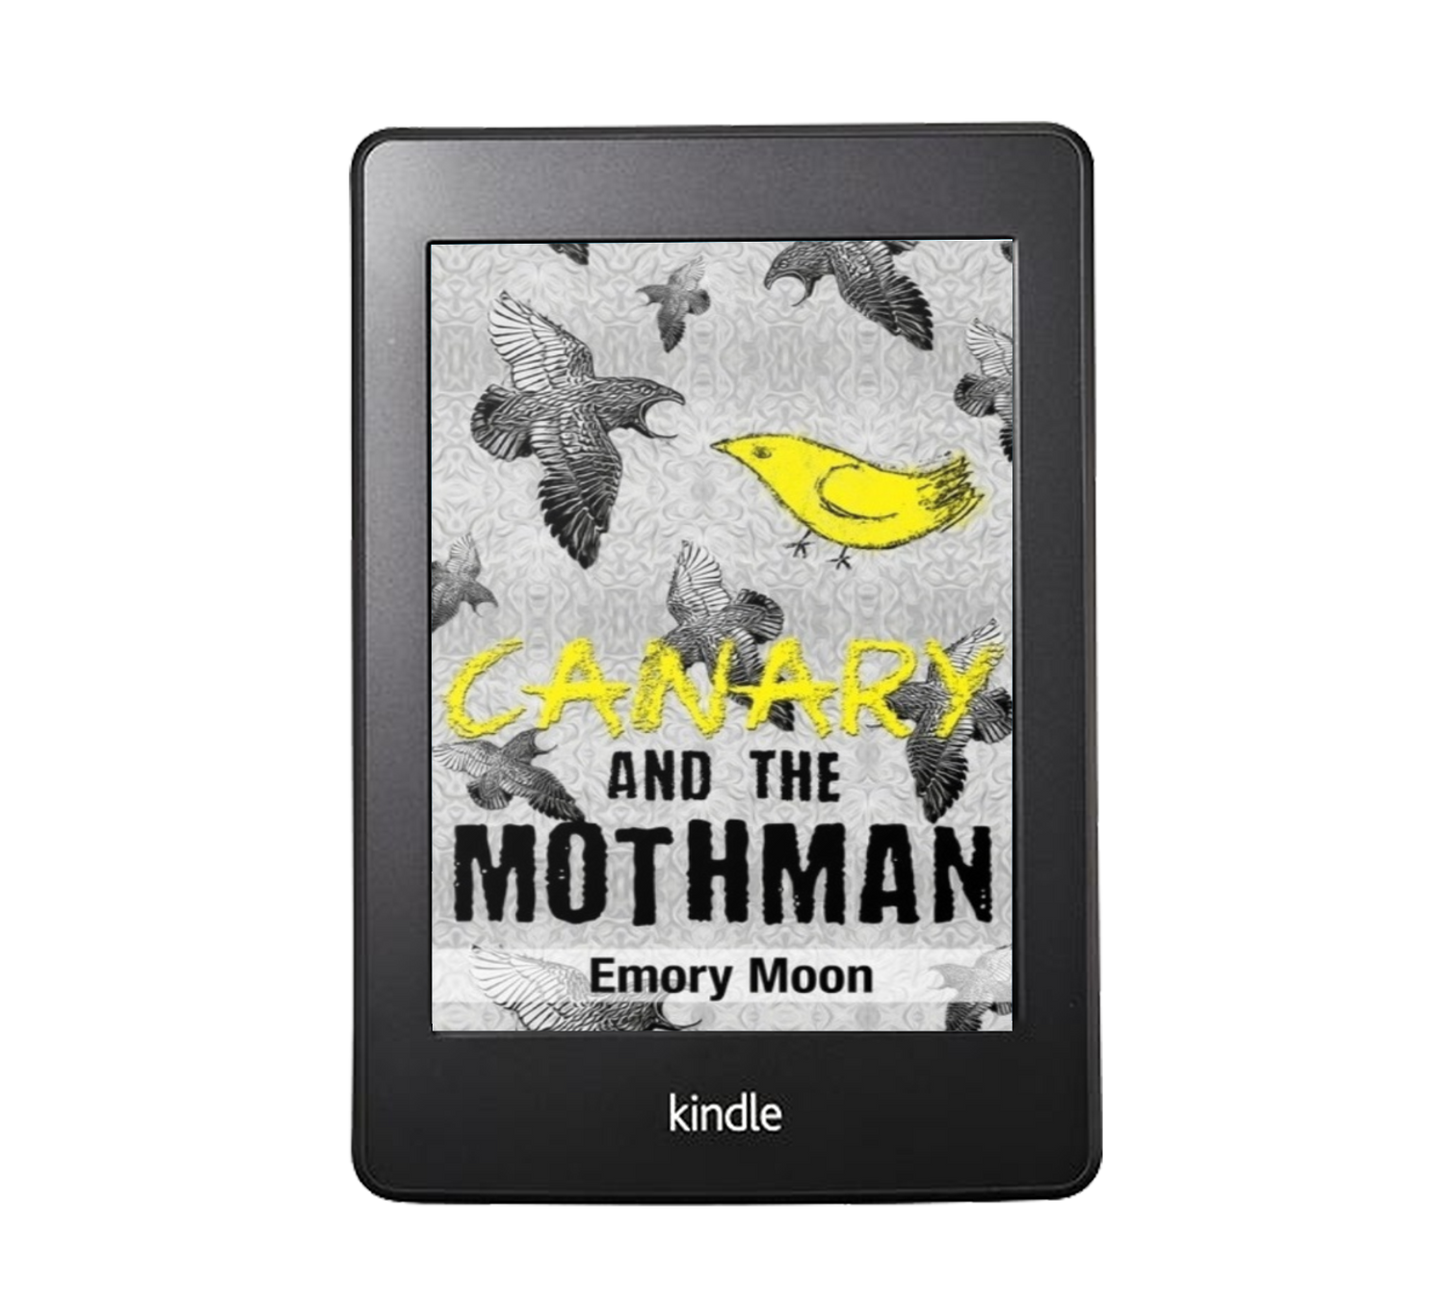 Canary and the Mothman - (ebook instant download)